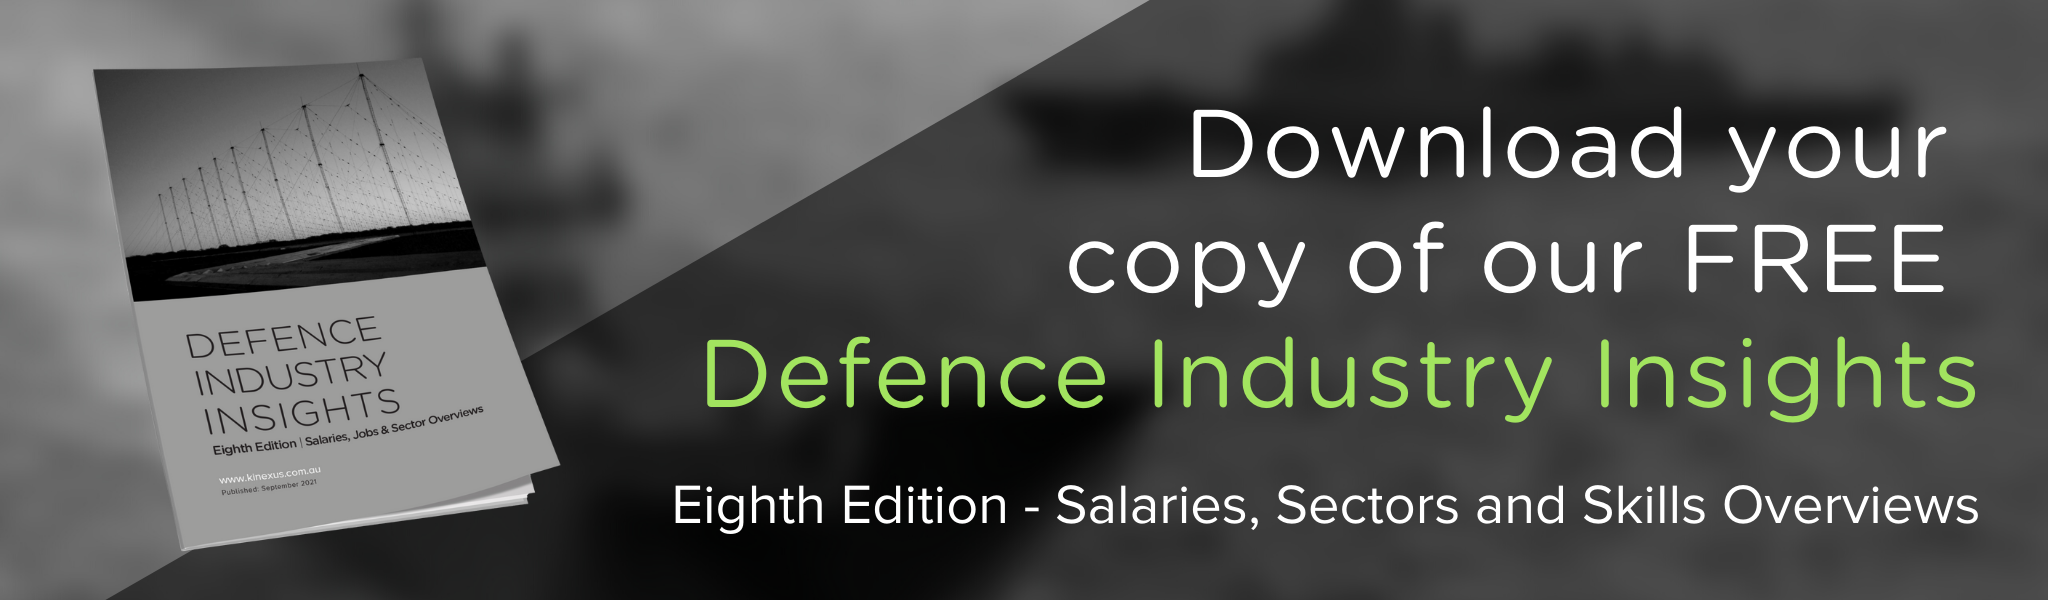 Defence Industry Insights | Eighth Edition